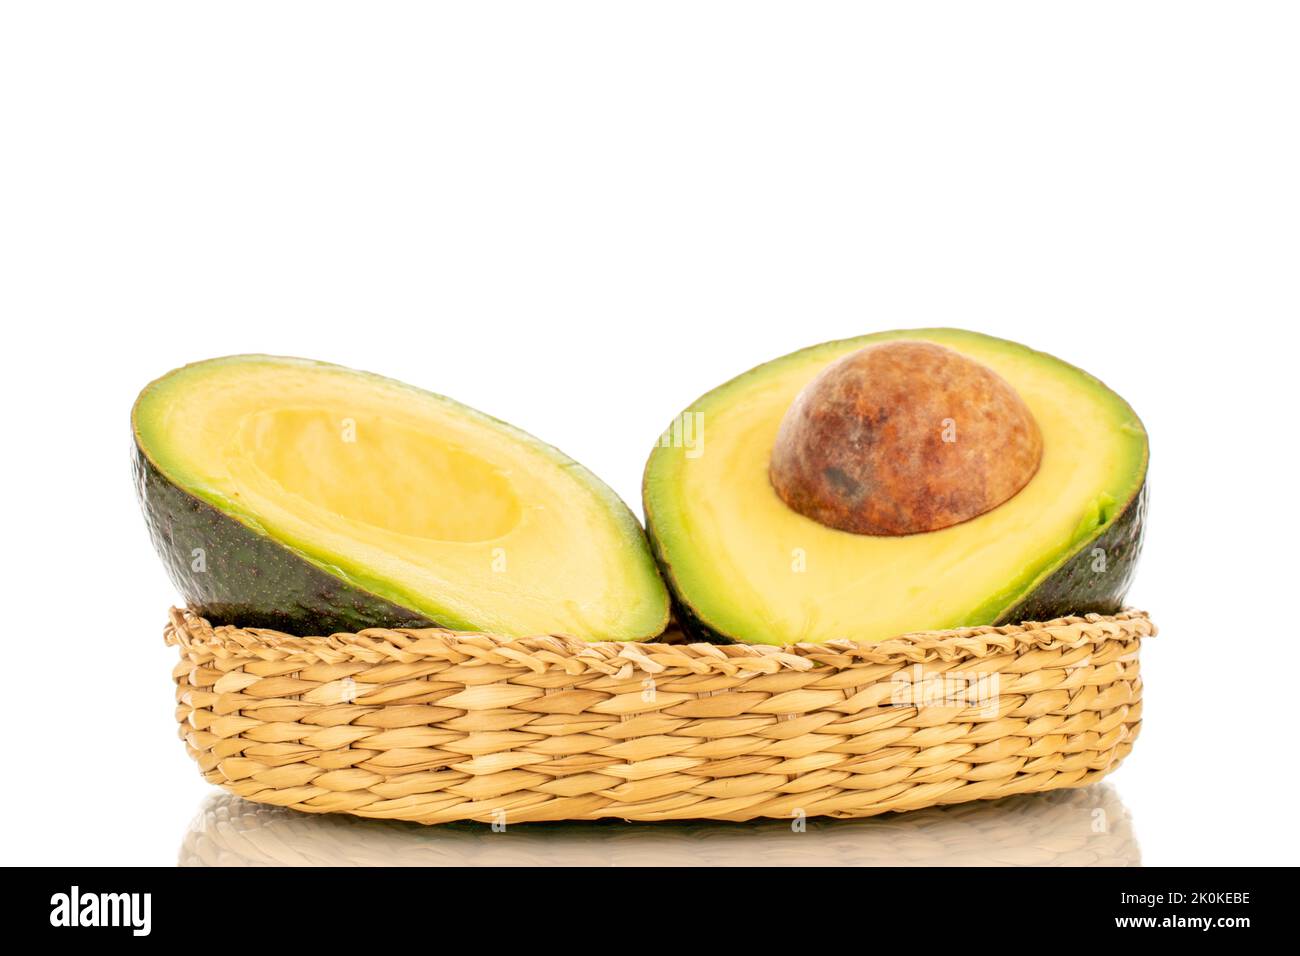 Two halves of a ripe organic avocado in a straw bowl, close-up, isolated on a white background. Stock Photo